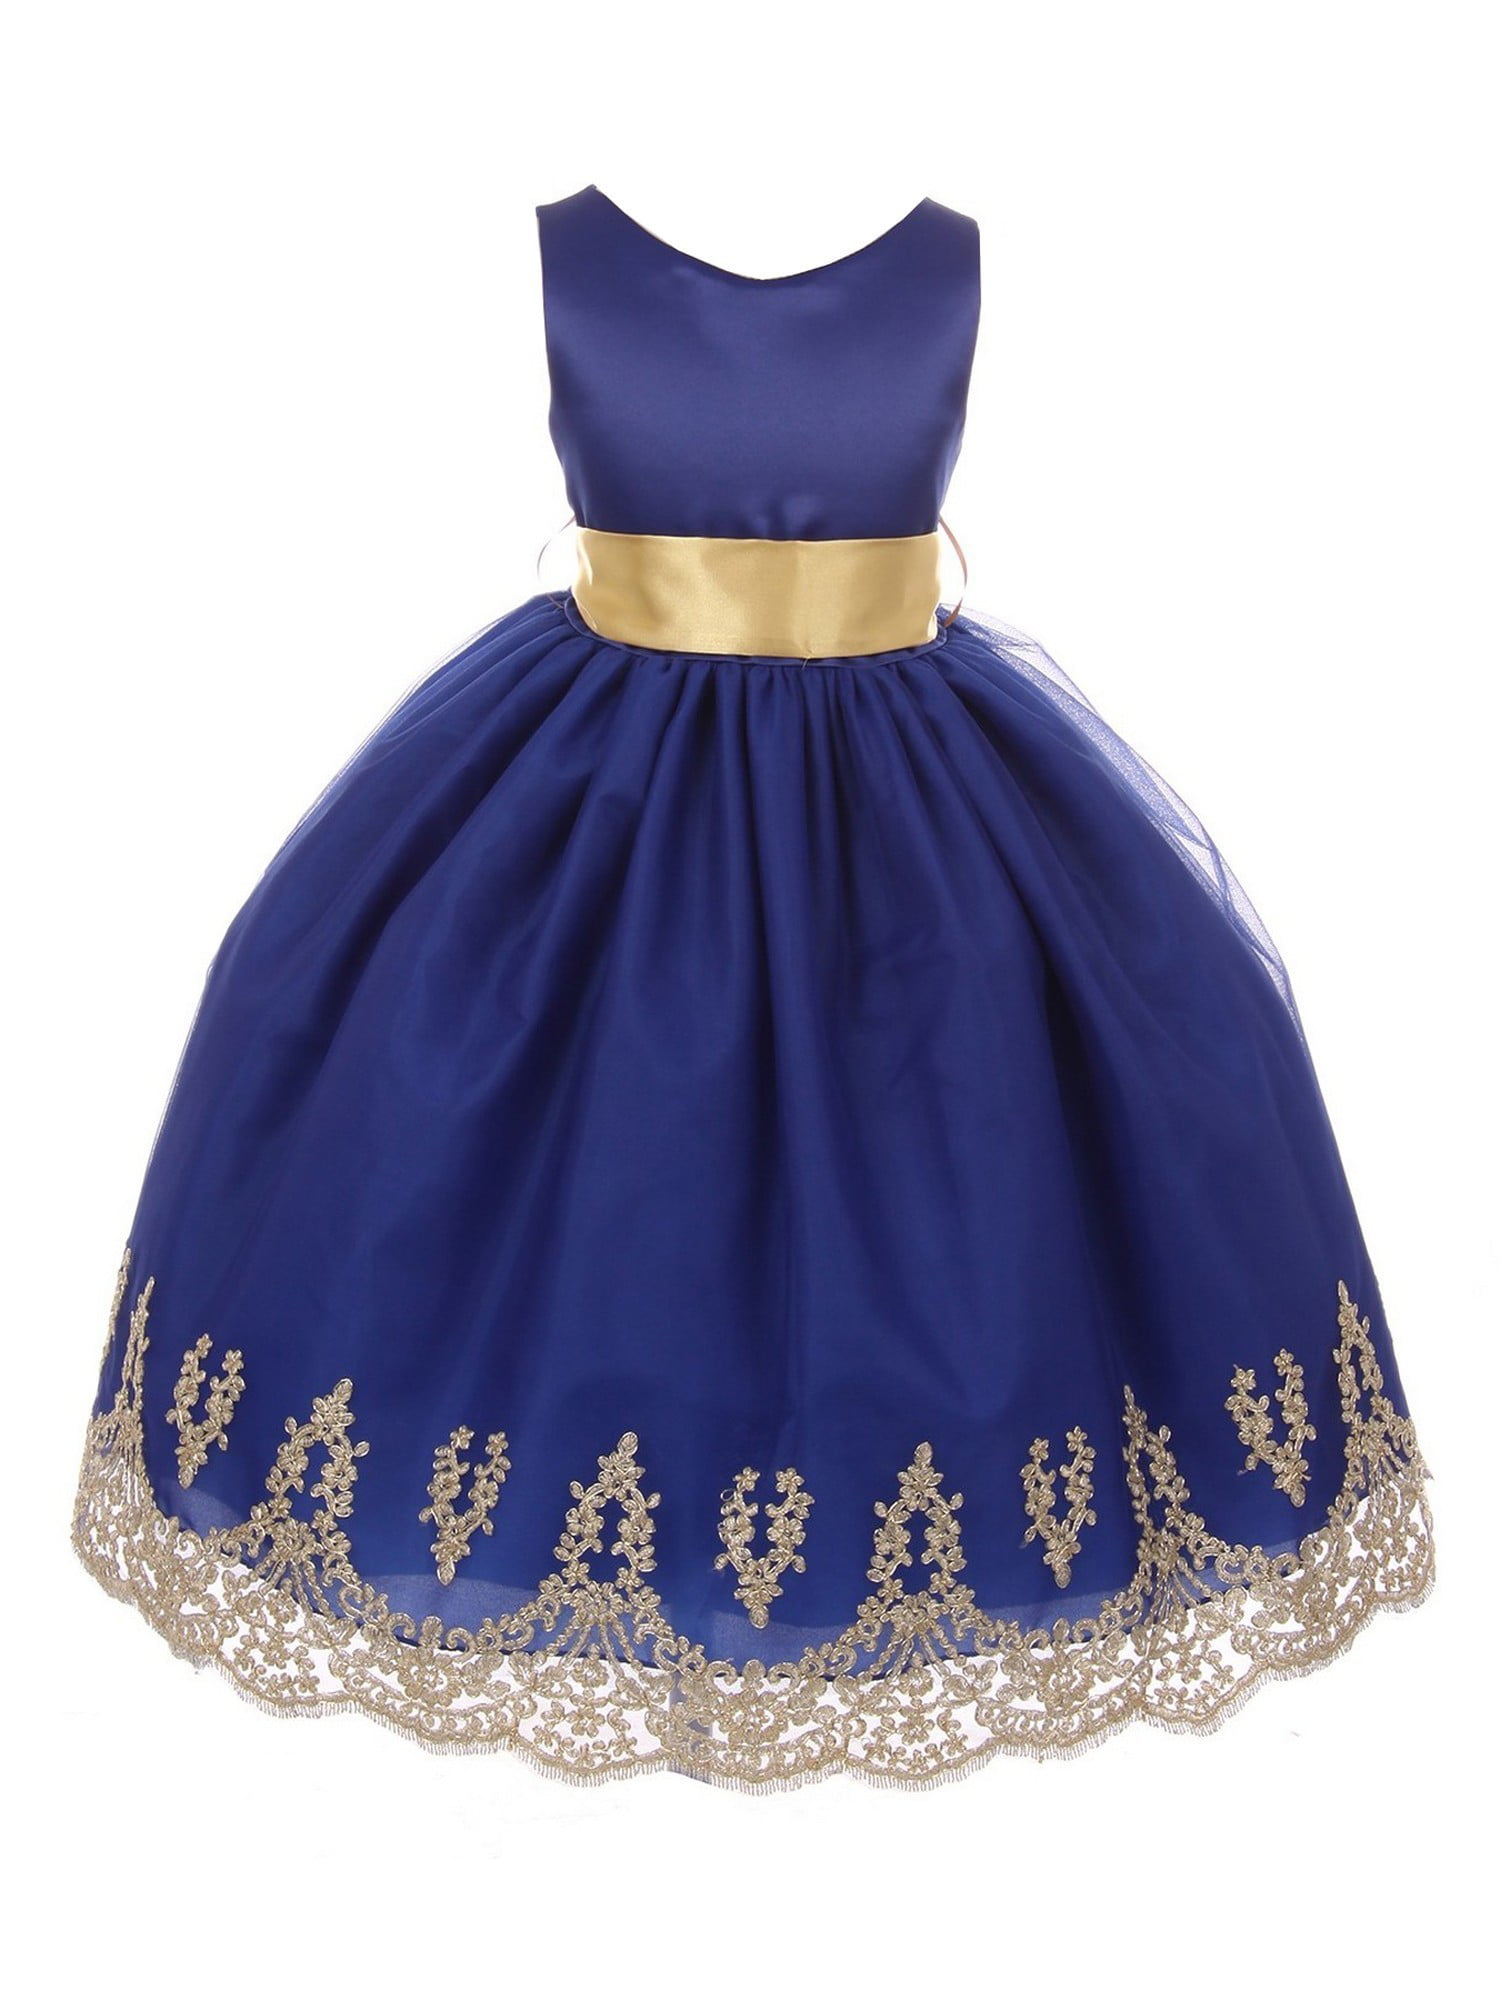 royal blue and gold dress for wedding